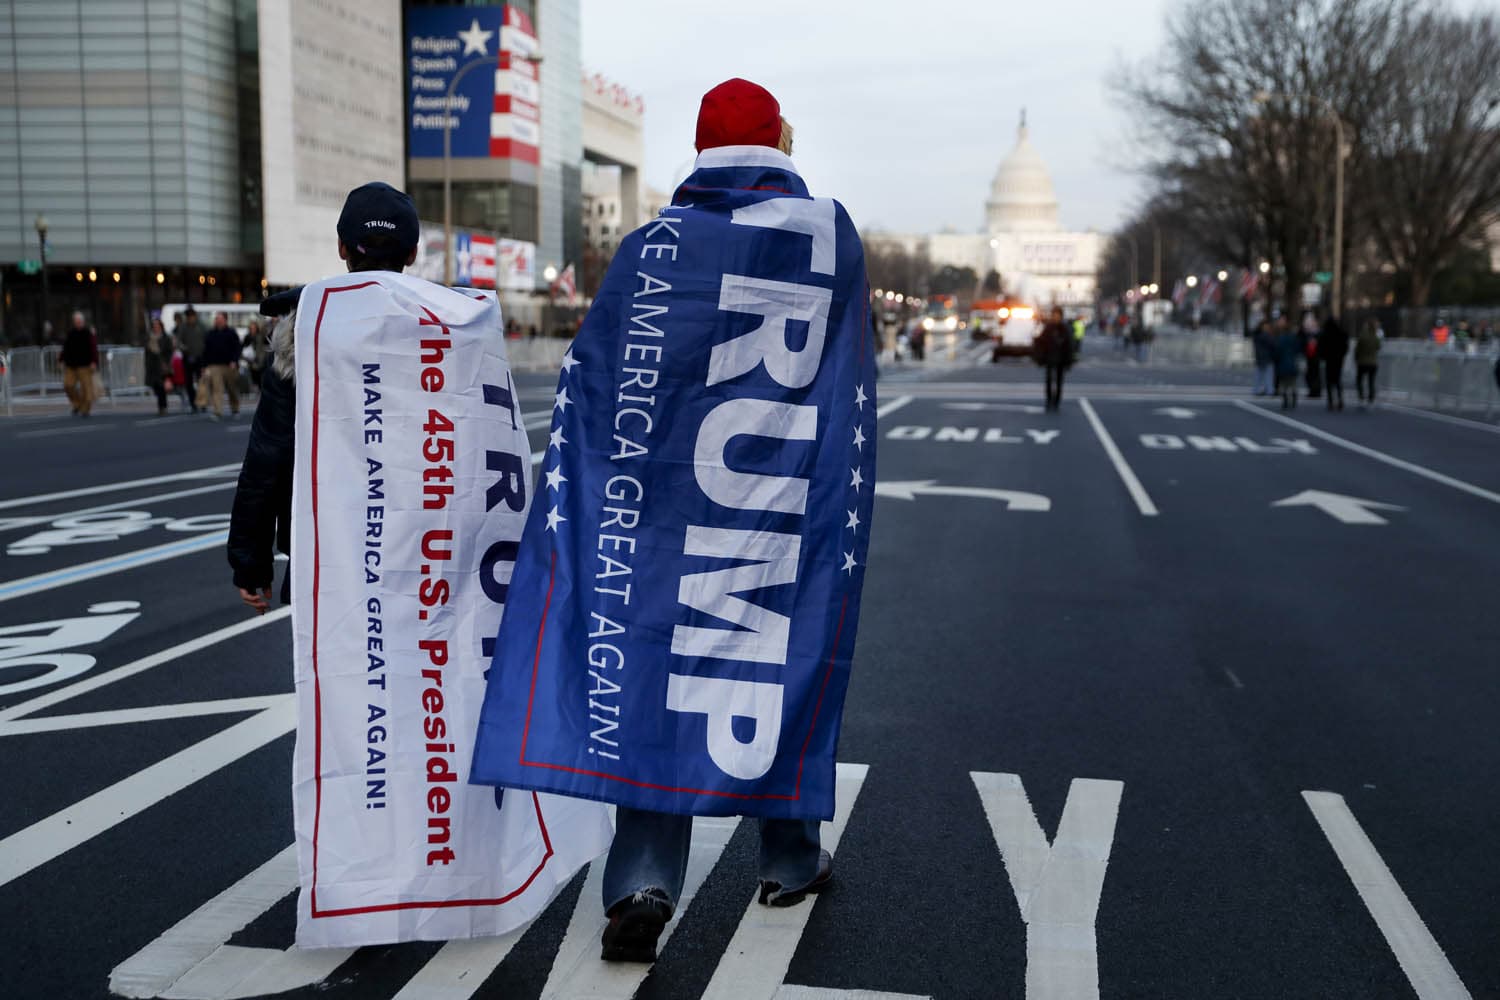 Supporters of President-elect Donald Trump walk along Pennsylvania Avenue Thursday after it was closed down to thru-traffic as security tightens ahead of the presidential inauguration. (John Minchillo/AP)